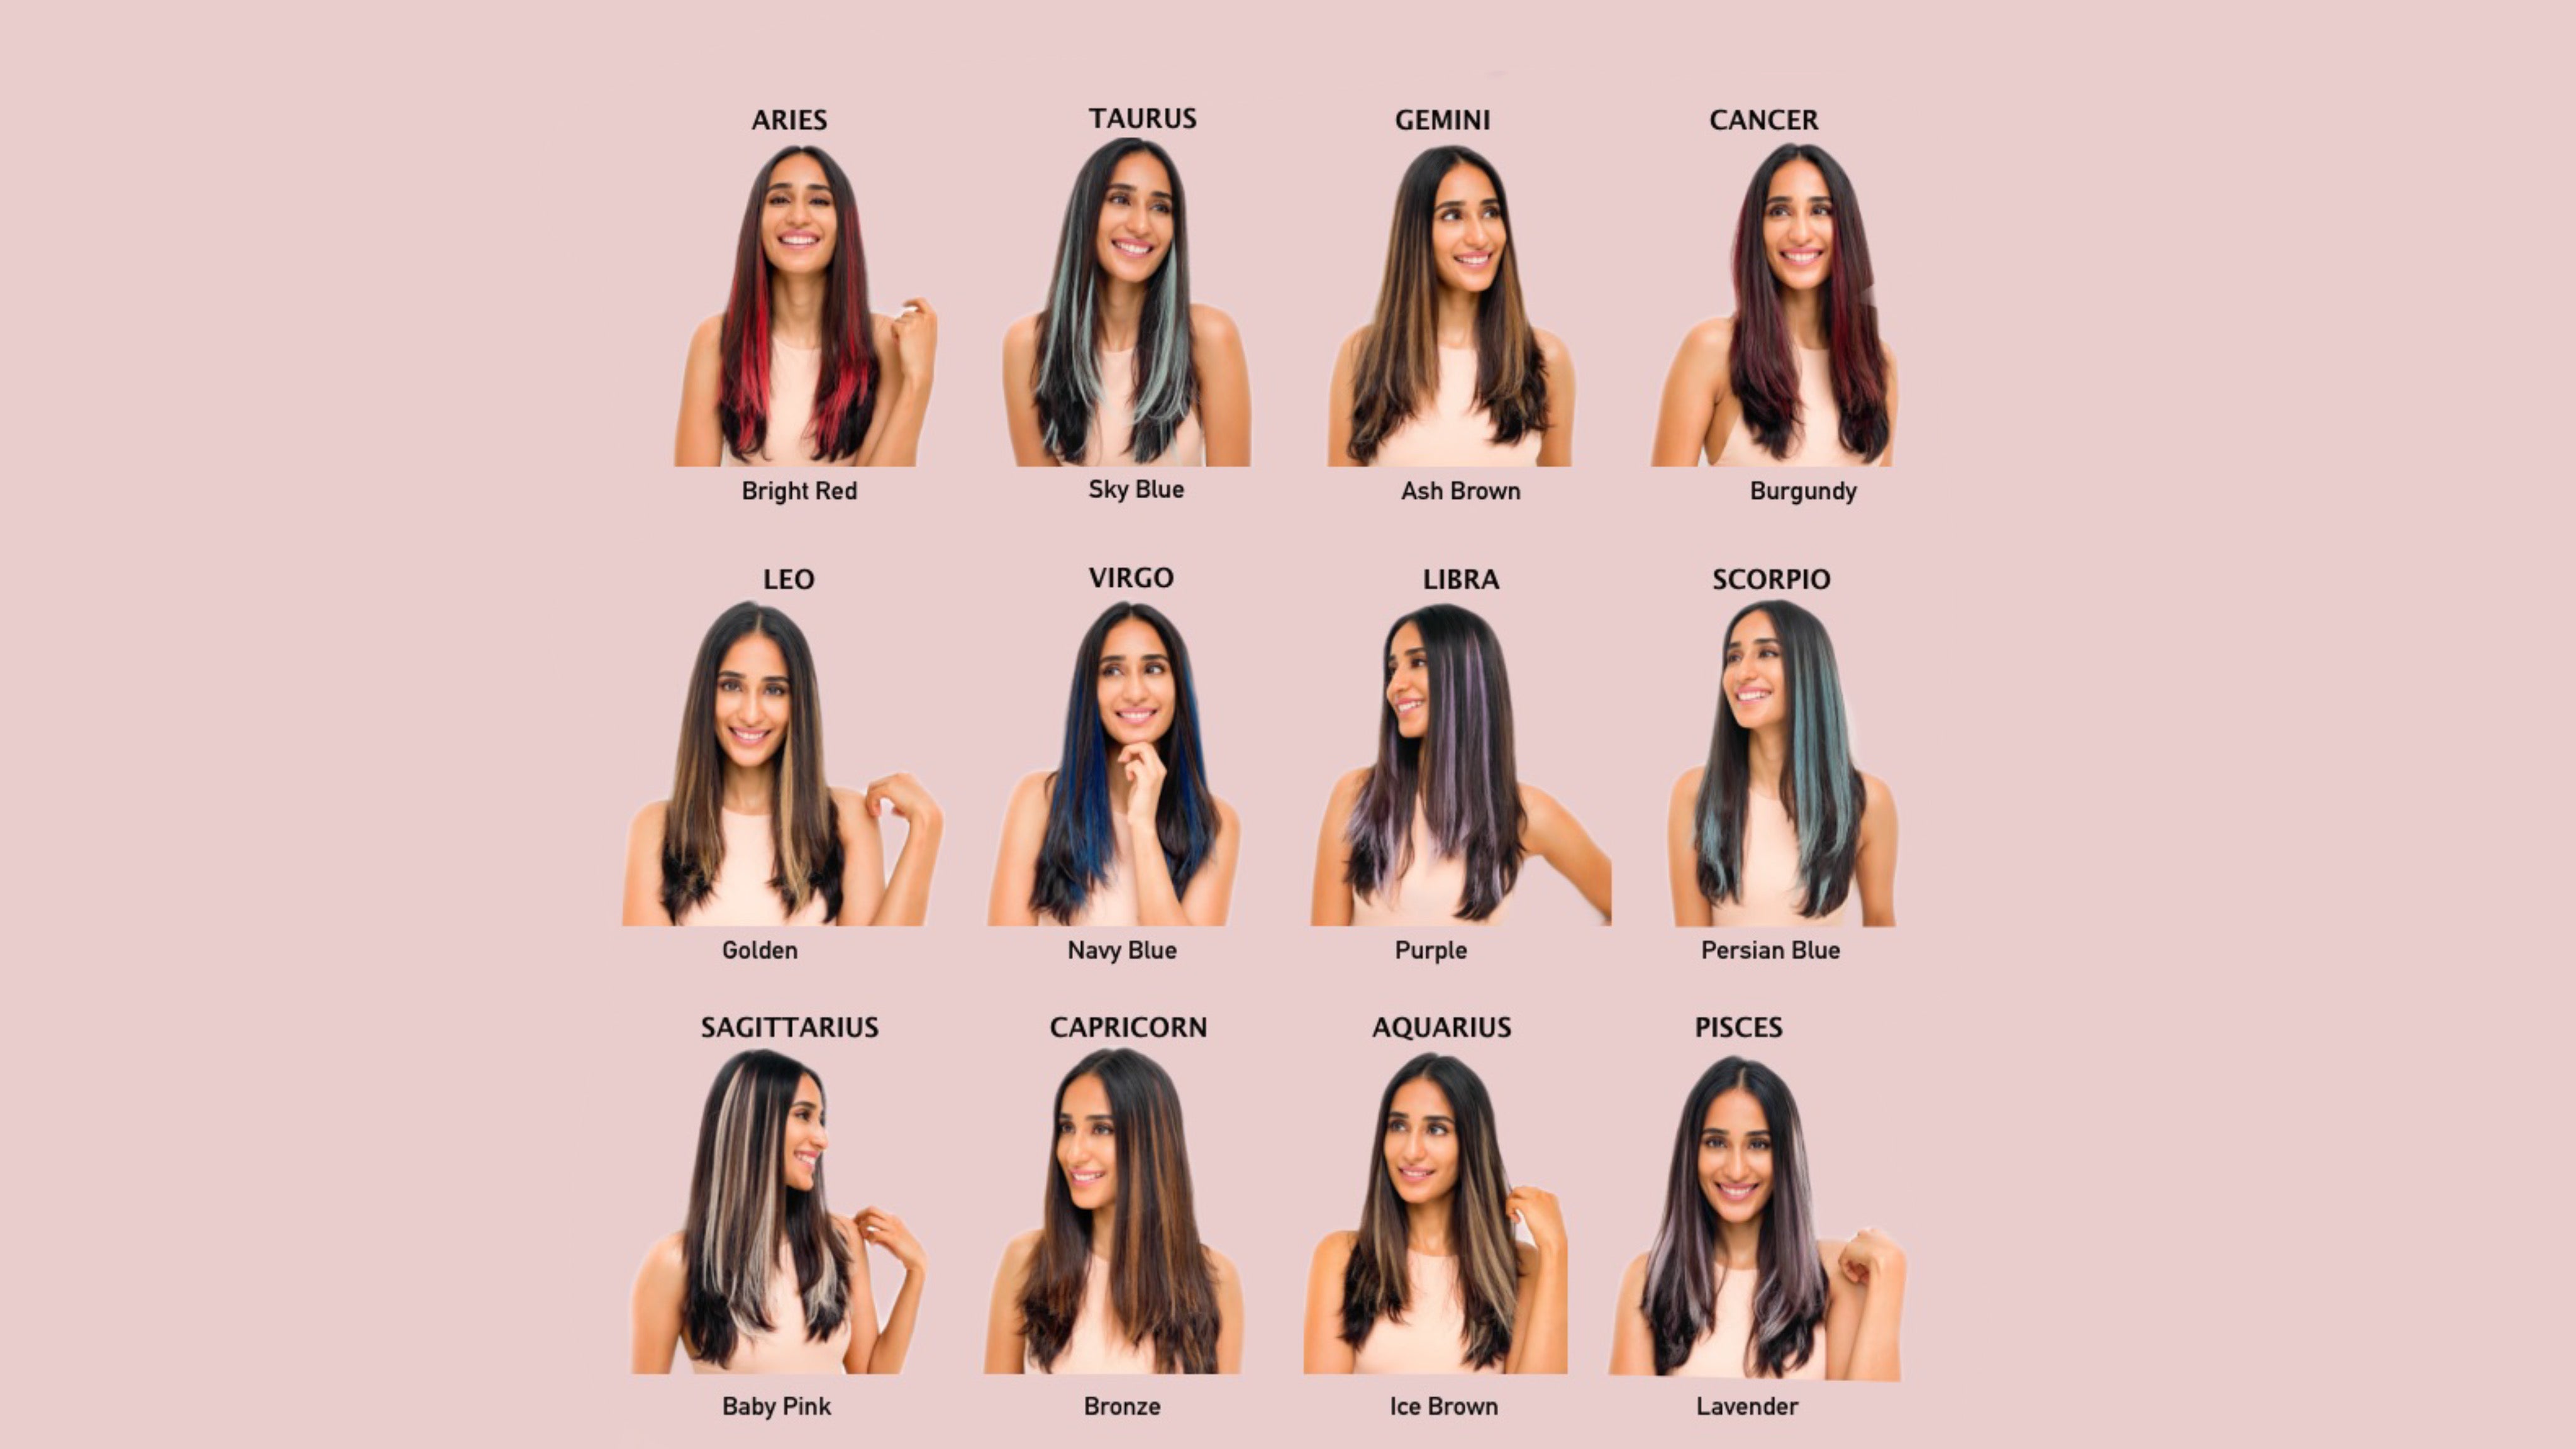 Best Hairstyles According to Zodiac Sign  Best Bollywood Hairtsyles   Vogue India  Vogue India